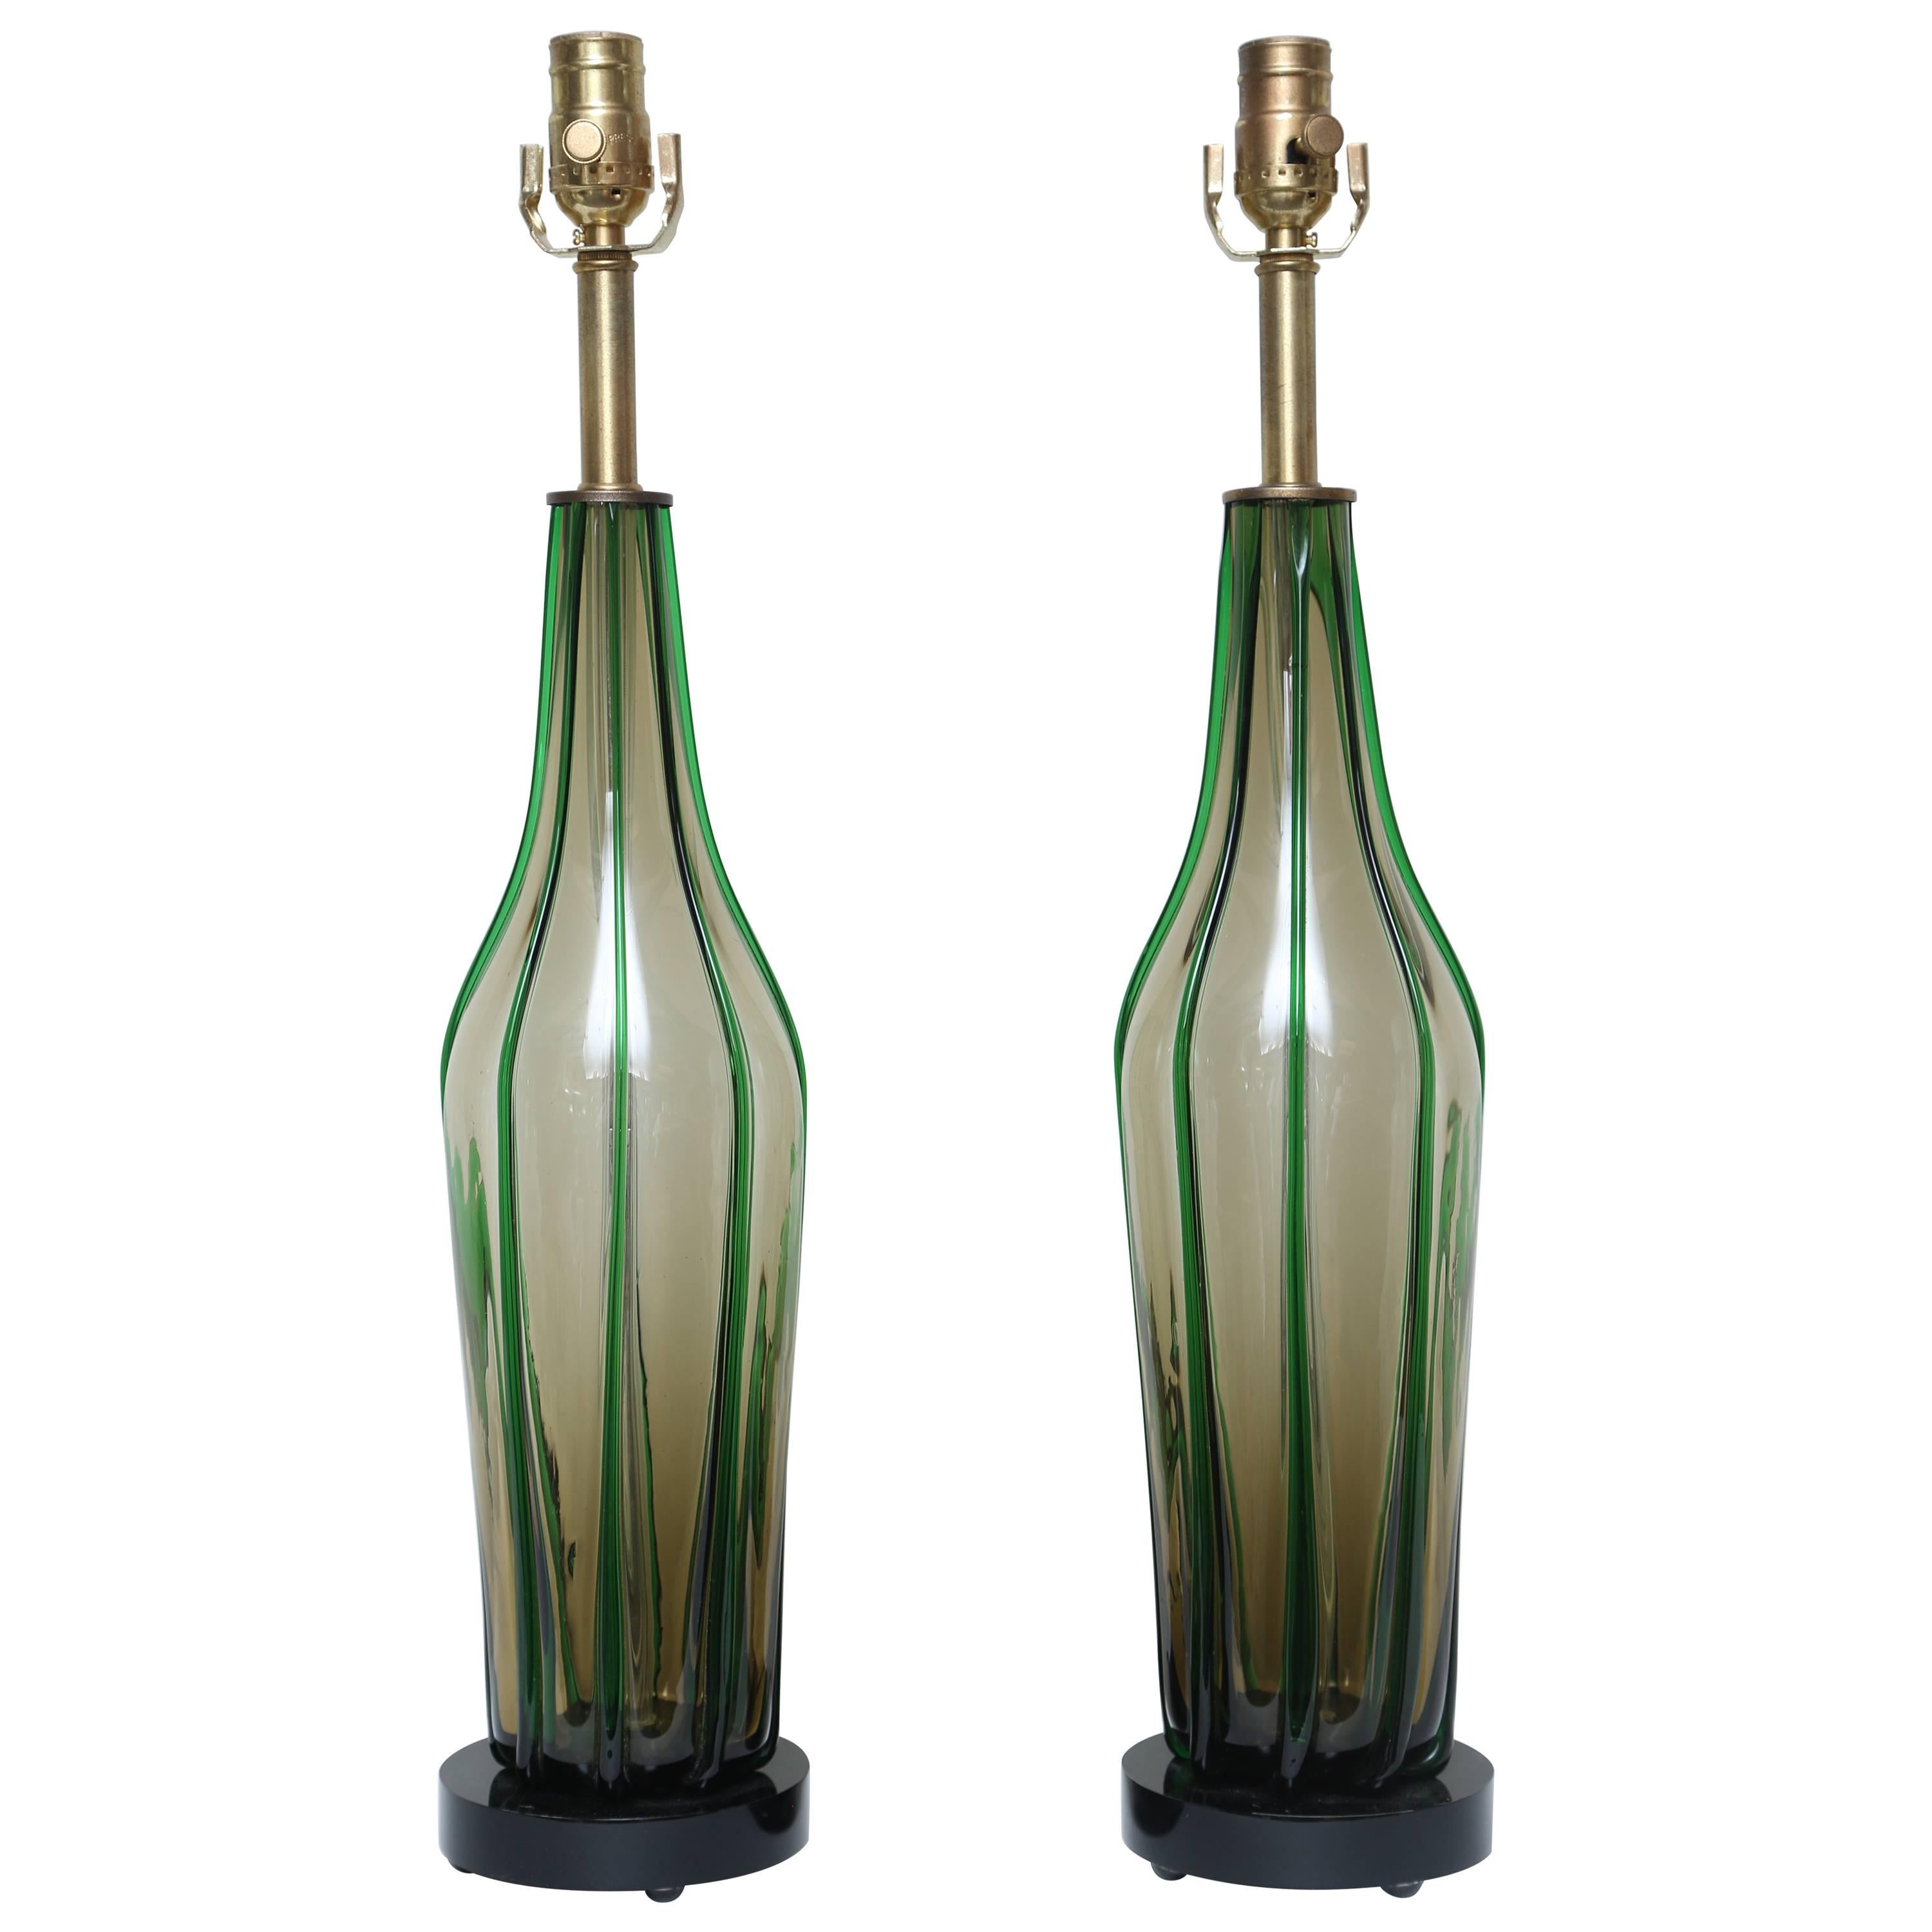 Superb Pair of Tall Mid-Century Murano Lamps